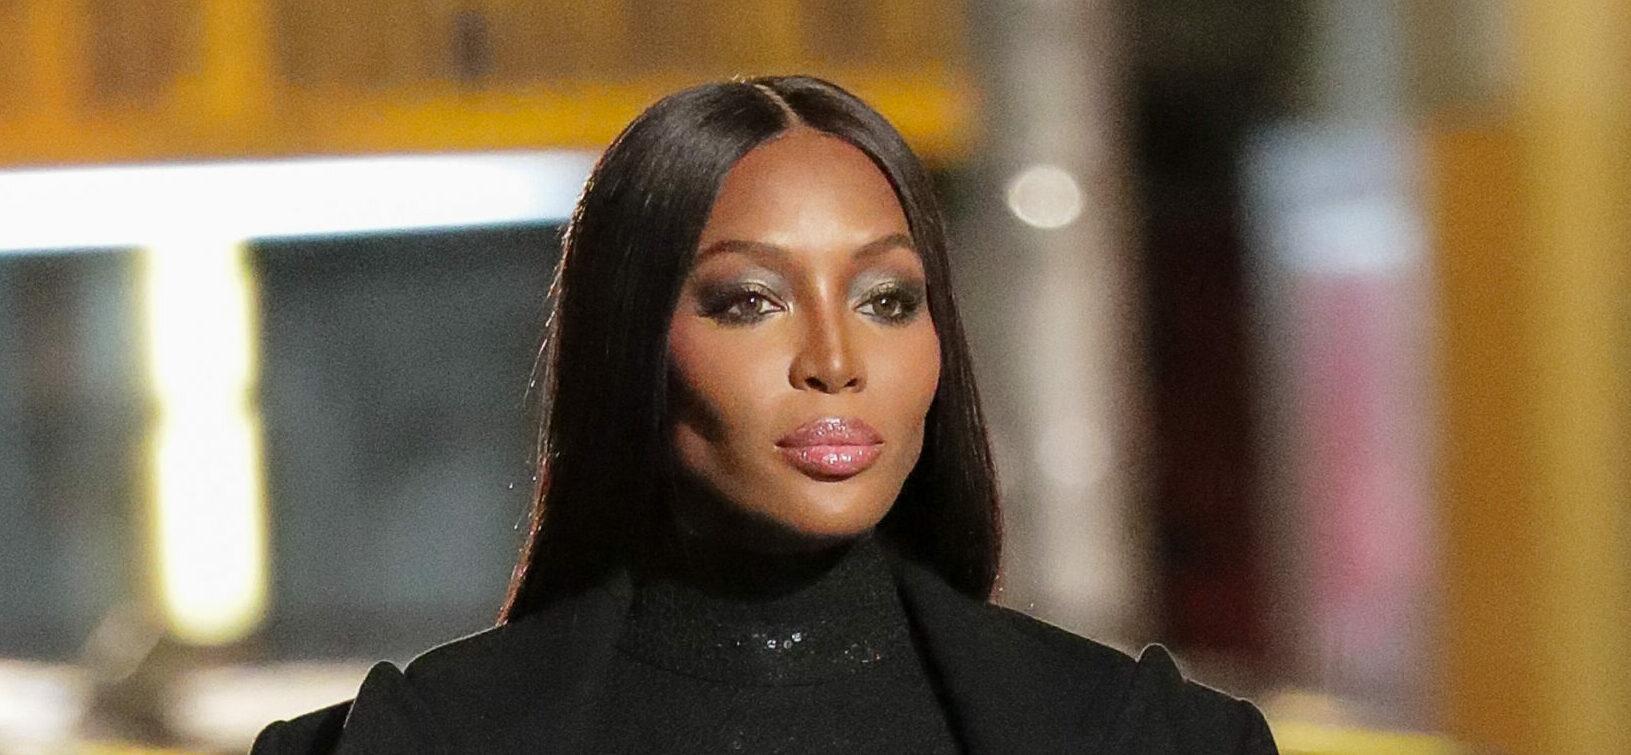 Naomi Campbell walks the runway at the Michael Kors 40th Anniversary in New York City Apr 08, 2021